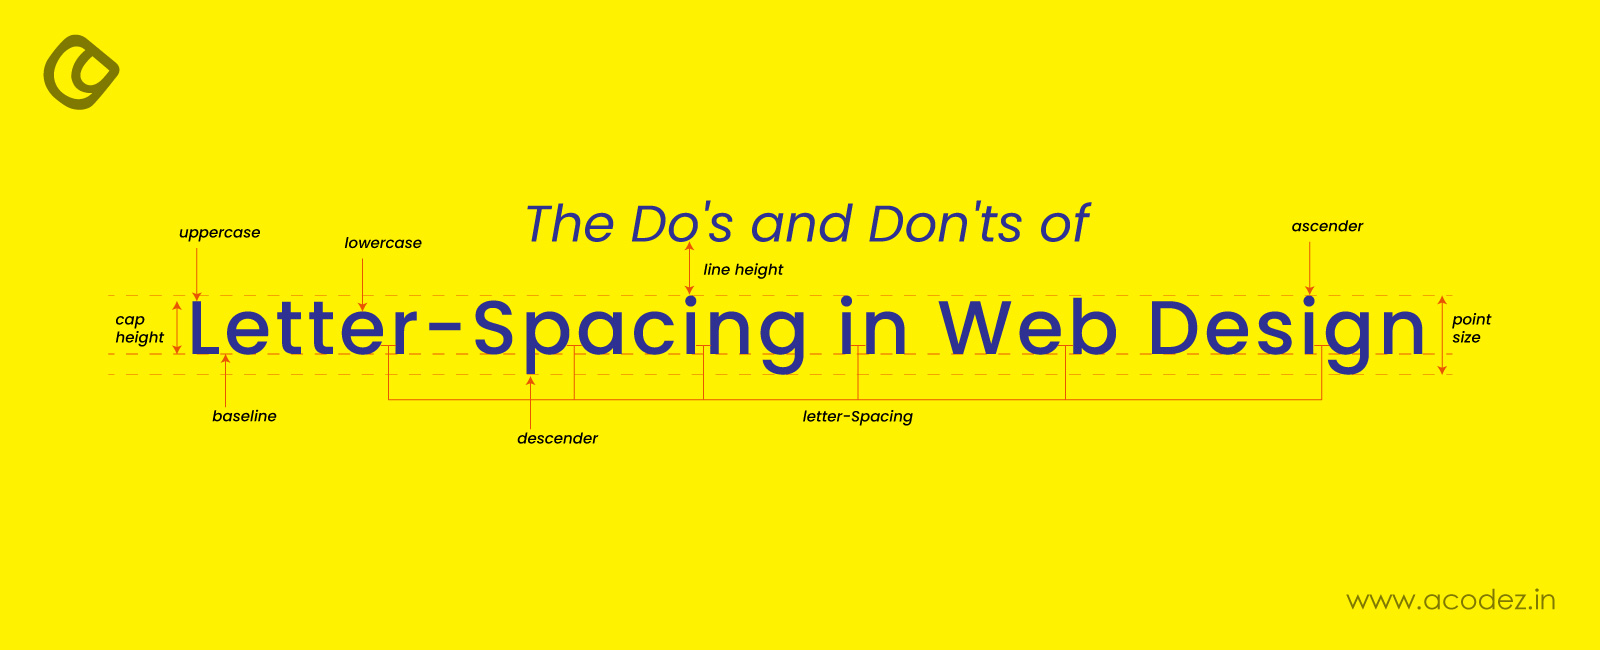 https://cdn.acodez.in/wp-content/uploads/2023/04/The-Dos-and-Donts-of-letter-spacing-in-web-design.jpg